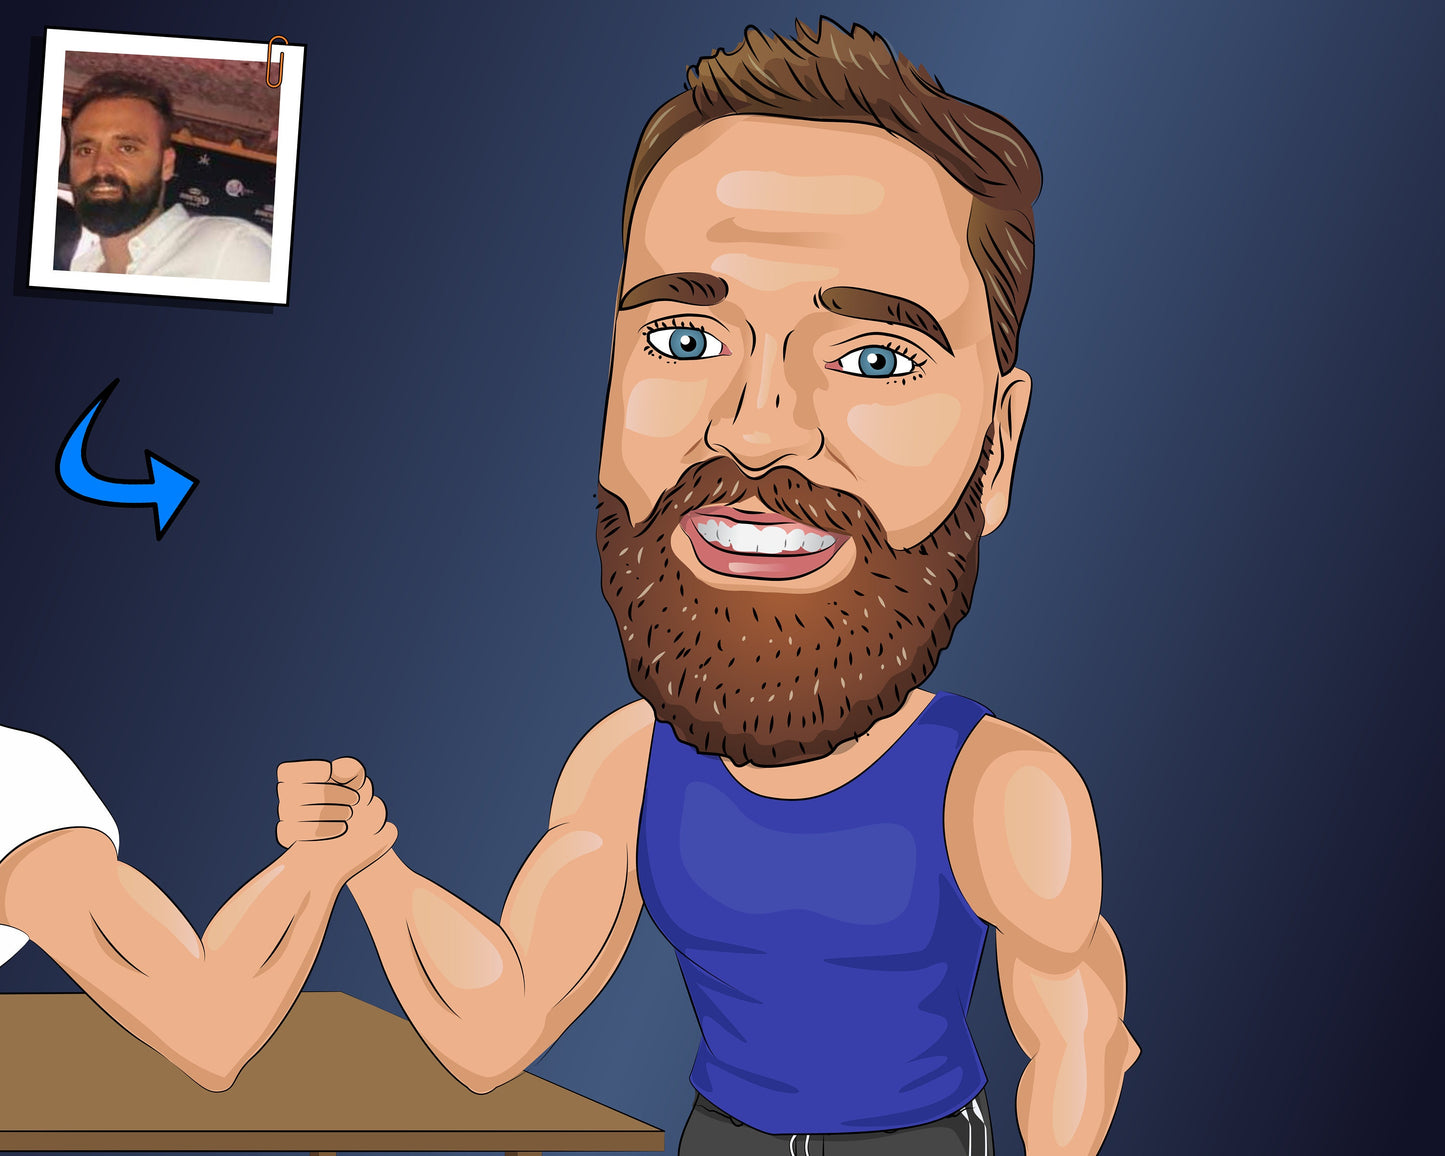 Arm Wrestler Gift - Custom Caricature Portrait From Your Photo/Arm Wrestling